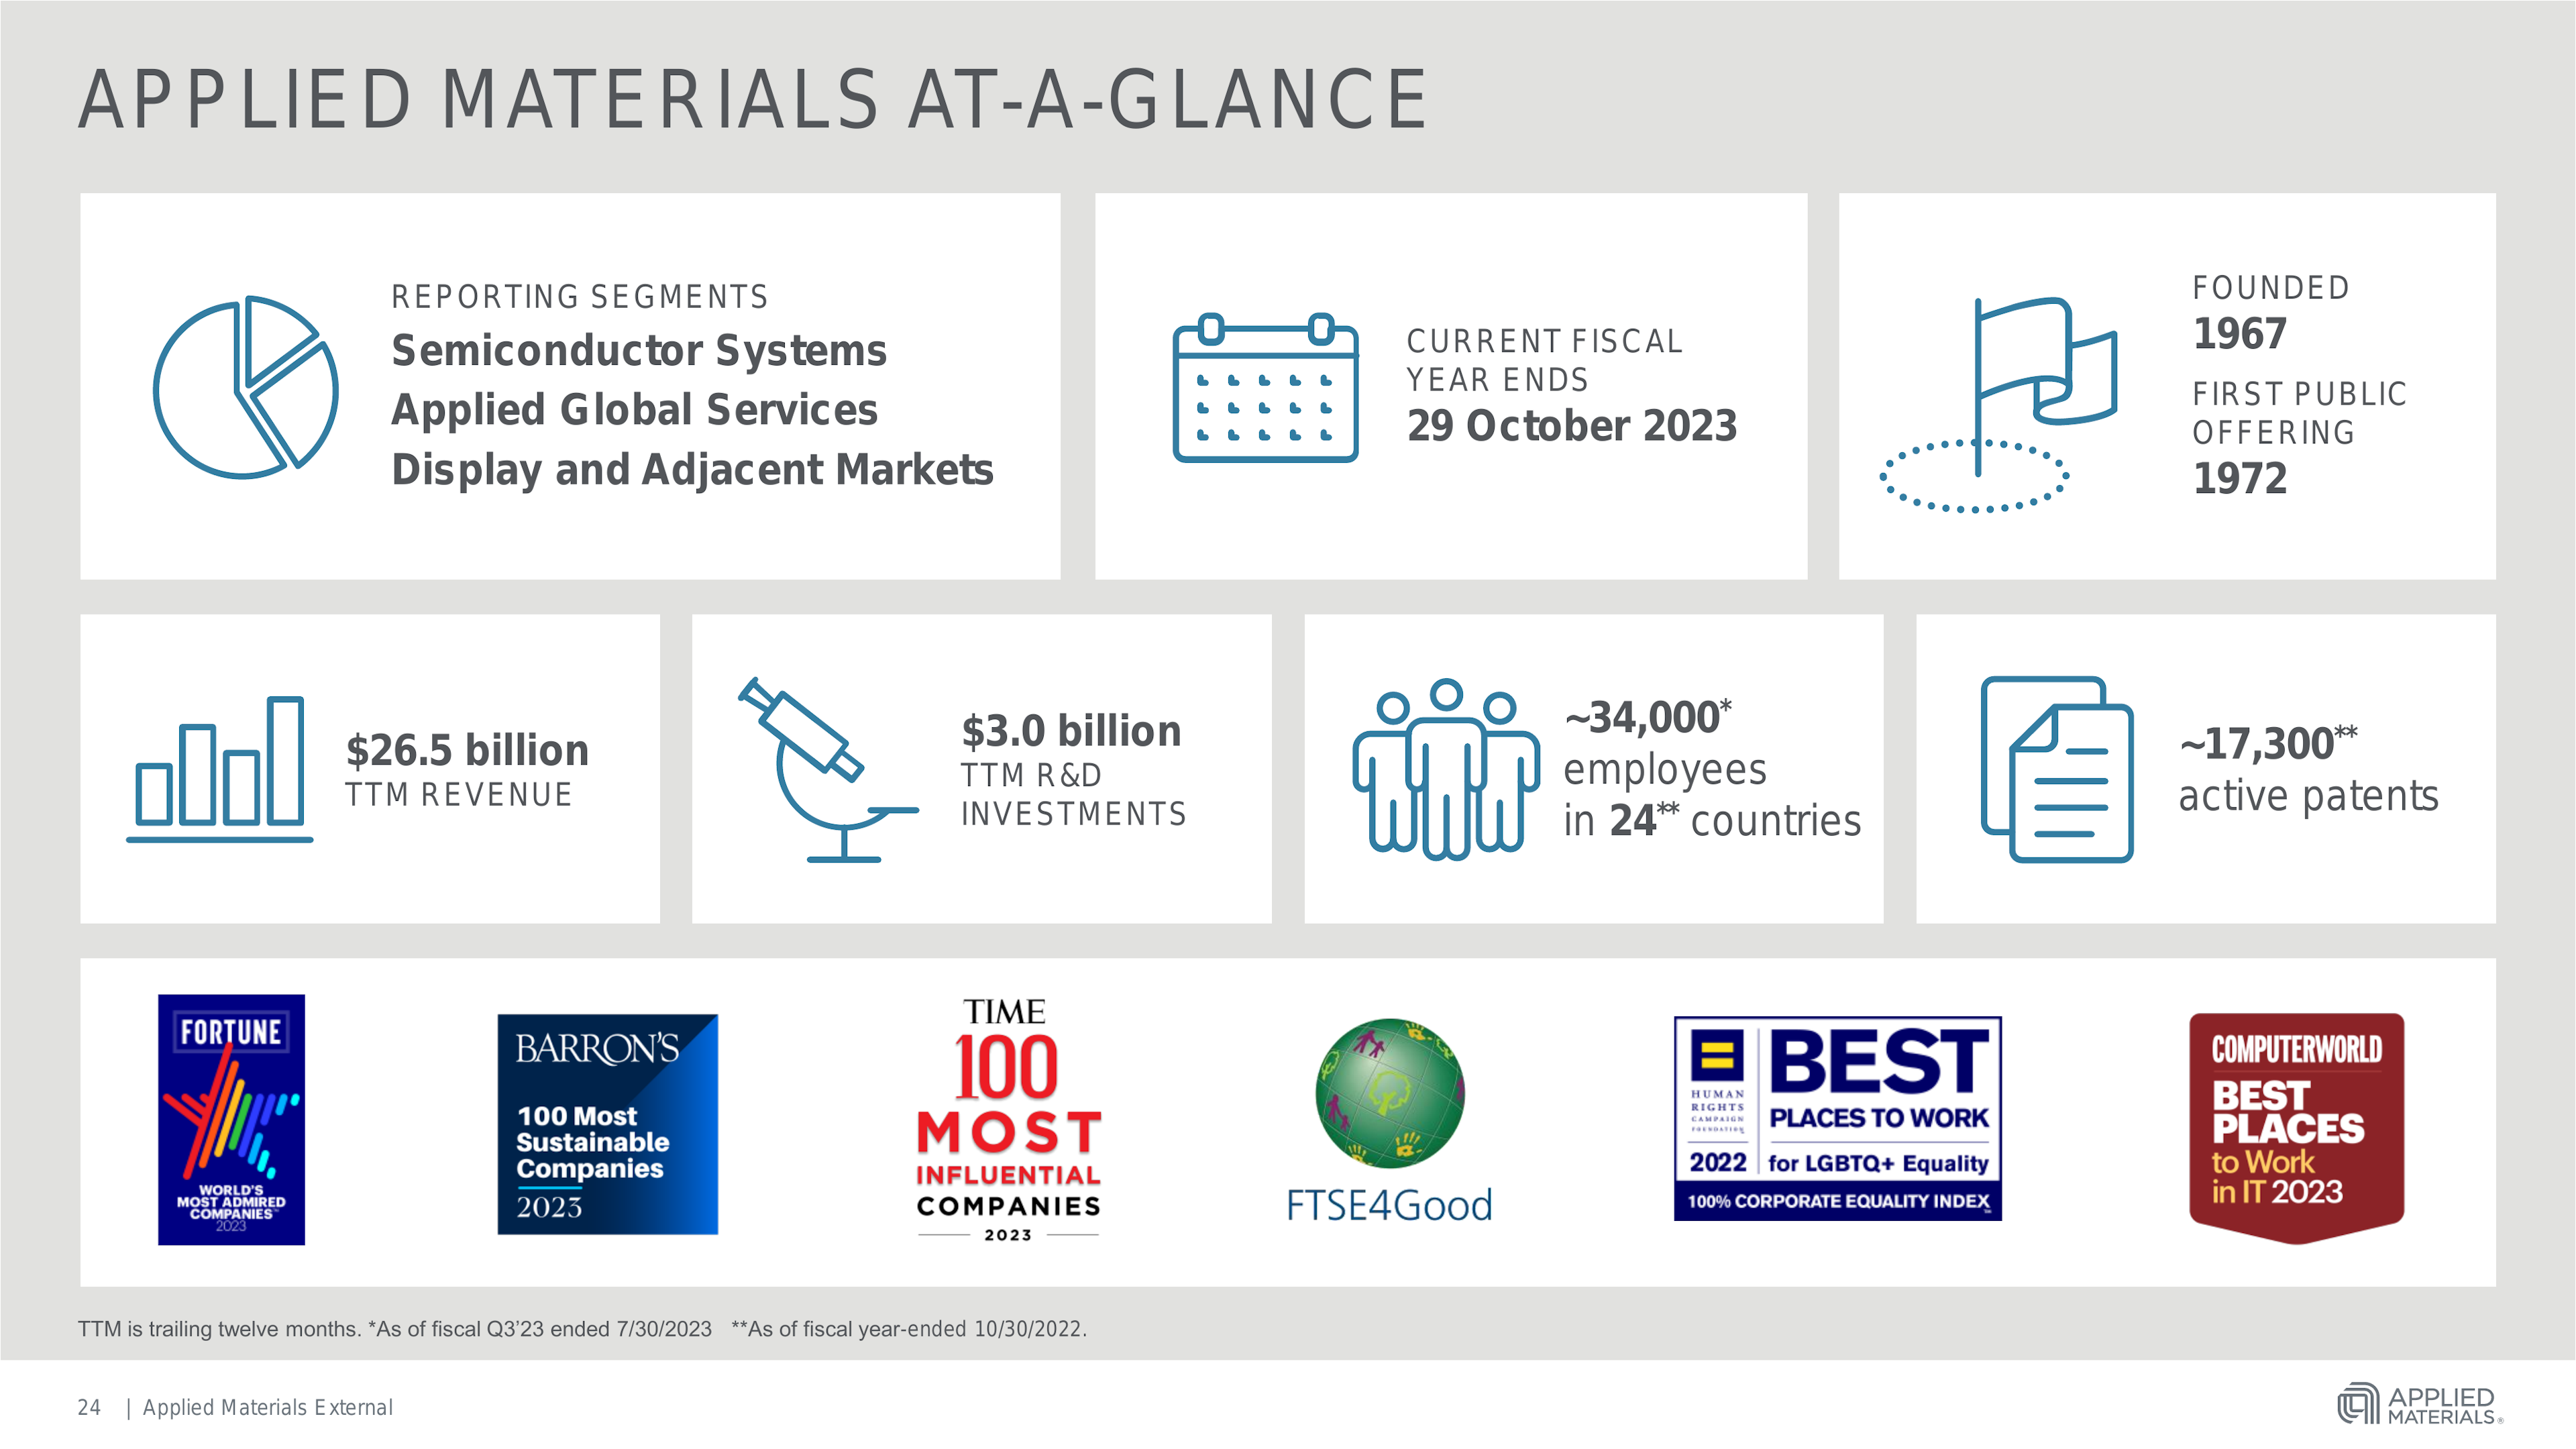 APPLIED MATERIALS AT